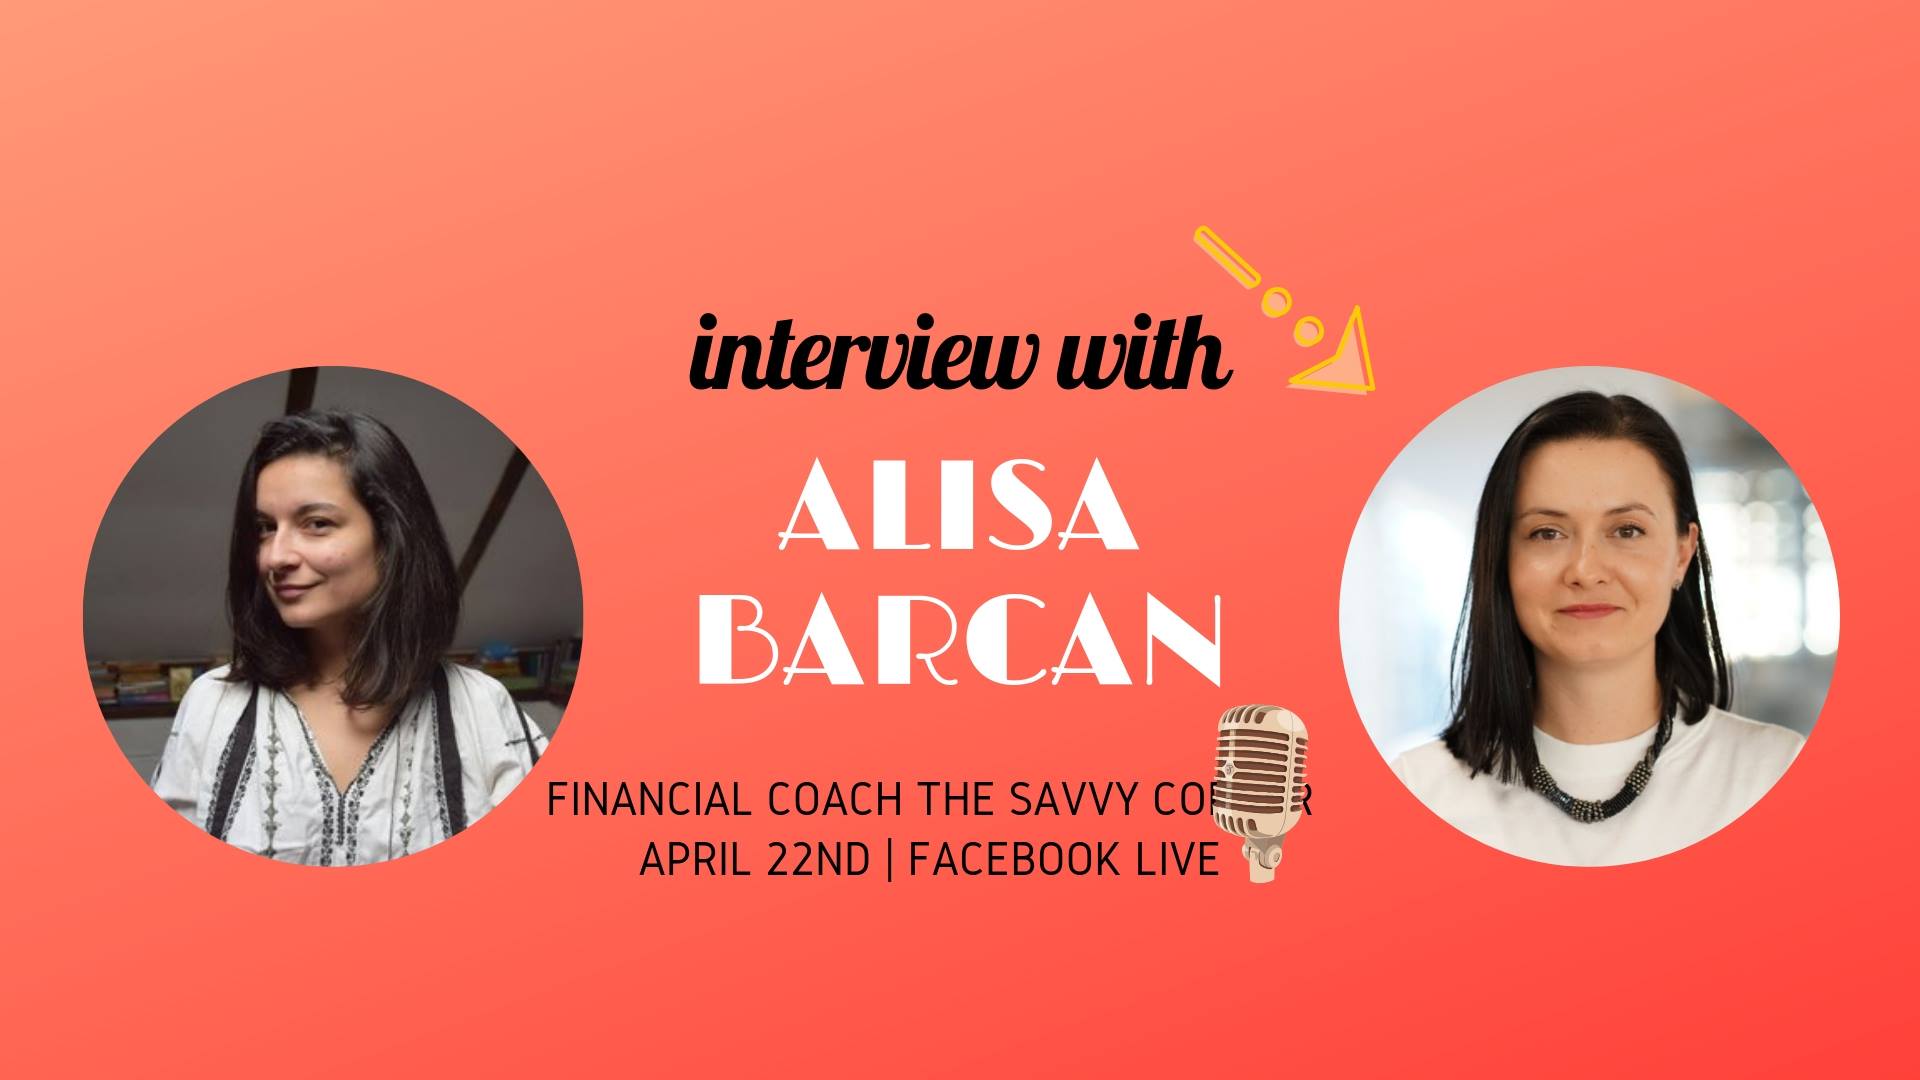 About Financial Abundance, Money Mindset, and Entrepreneurship with Alisa Barcan, Financial Coach -  Click for the interview  #visibilitycoach #interviews #femaleentrepreneurs #girlboss #abundance #moneymindset #money